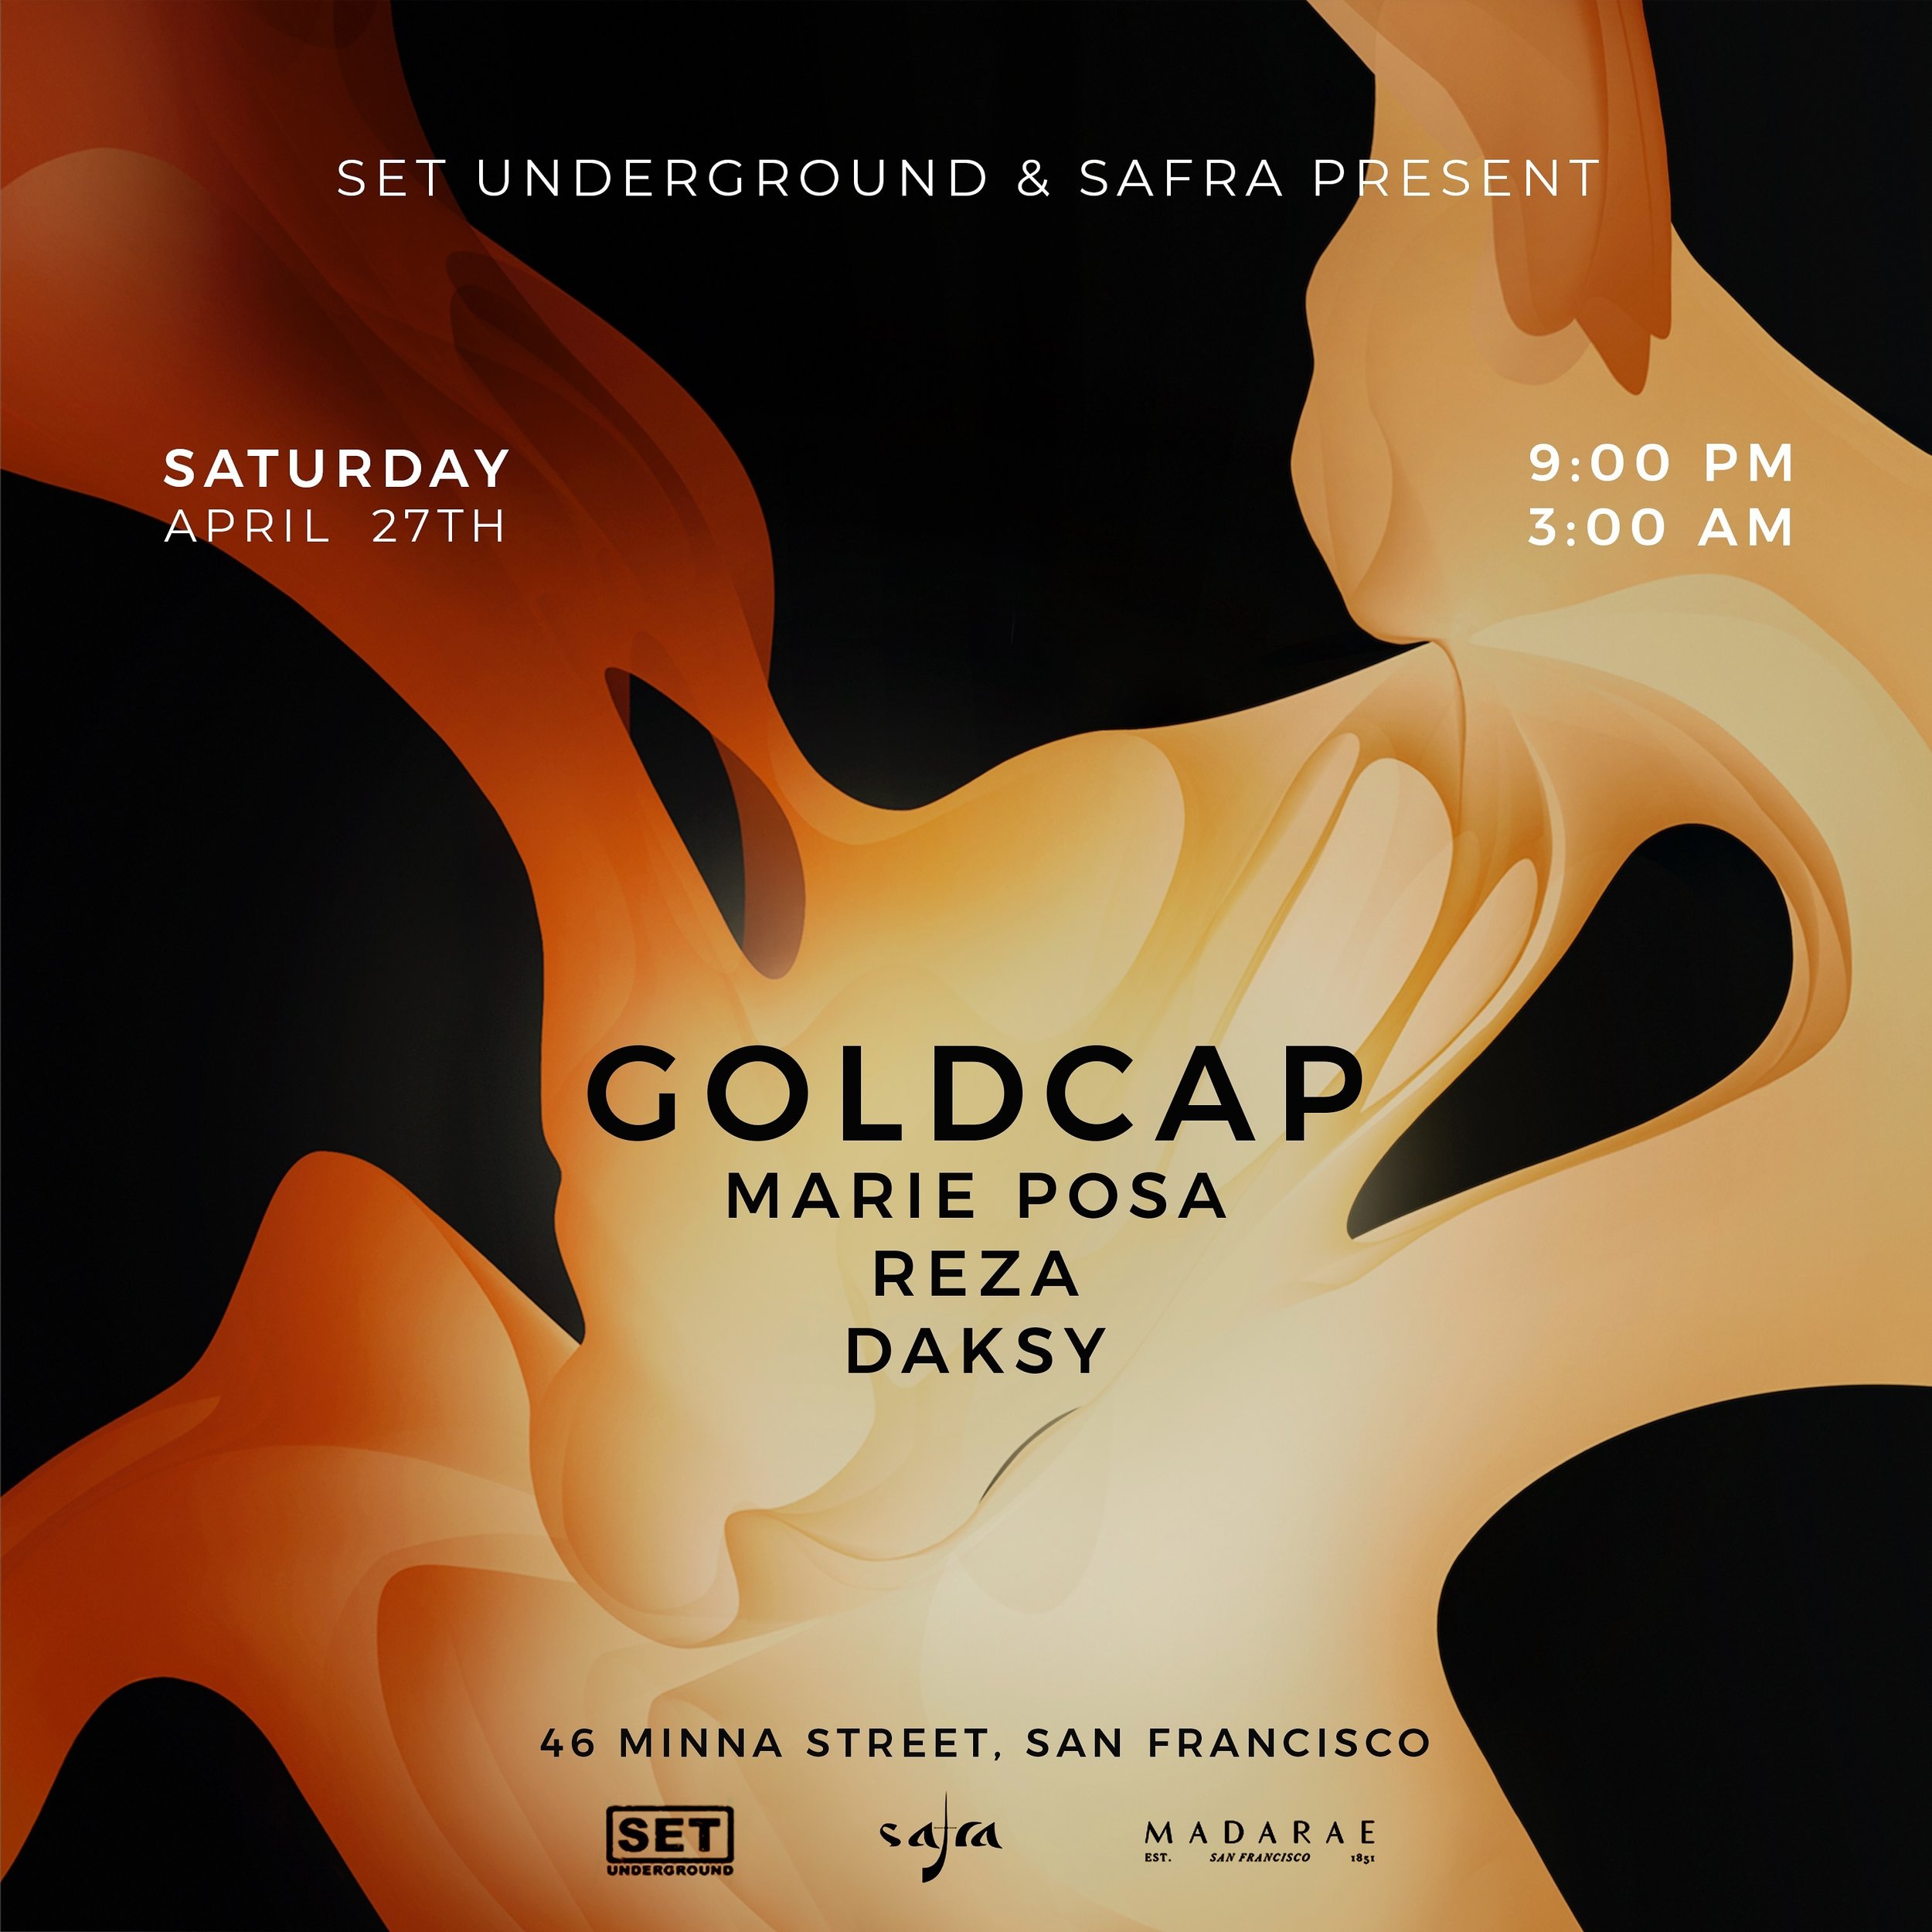 San Francisco! Almost In 2 weeks! The wizard himself @goldcap is coming to @madaraesf with a very special set! Strong support from our good friends @marieposa.dj @thisissabzi @davidandersonkirk 
Don&rsquo;t miss it! Link in bio!